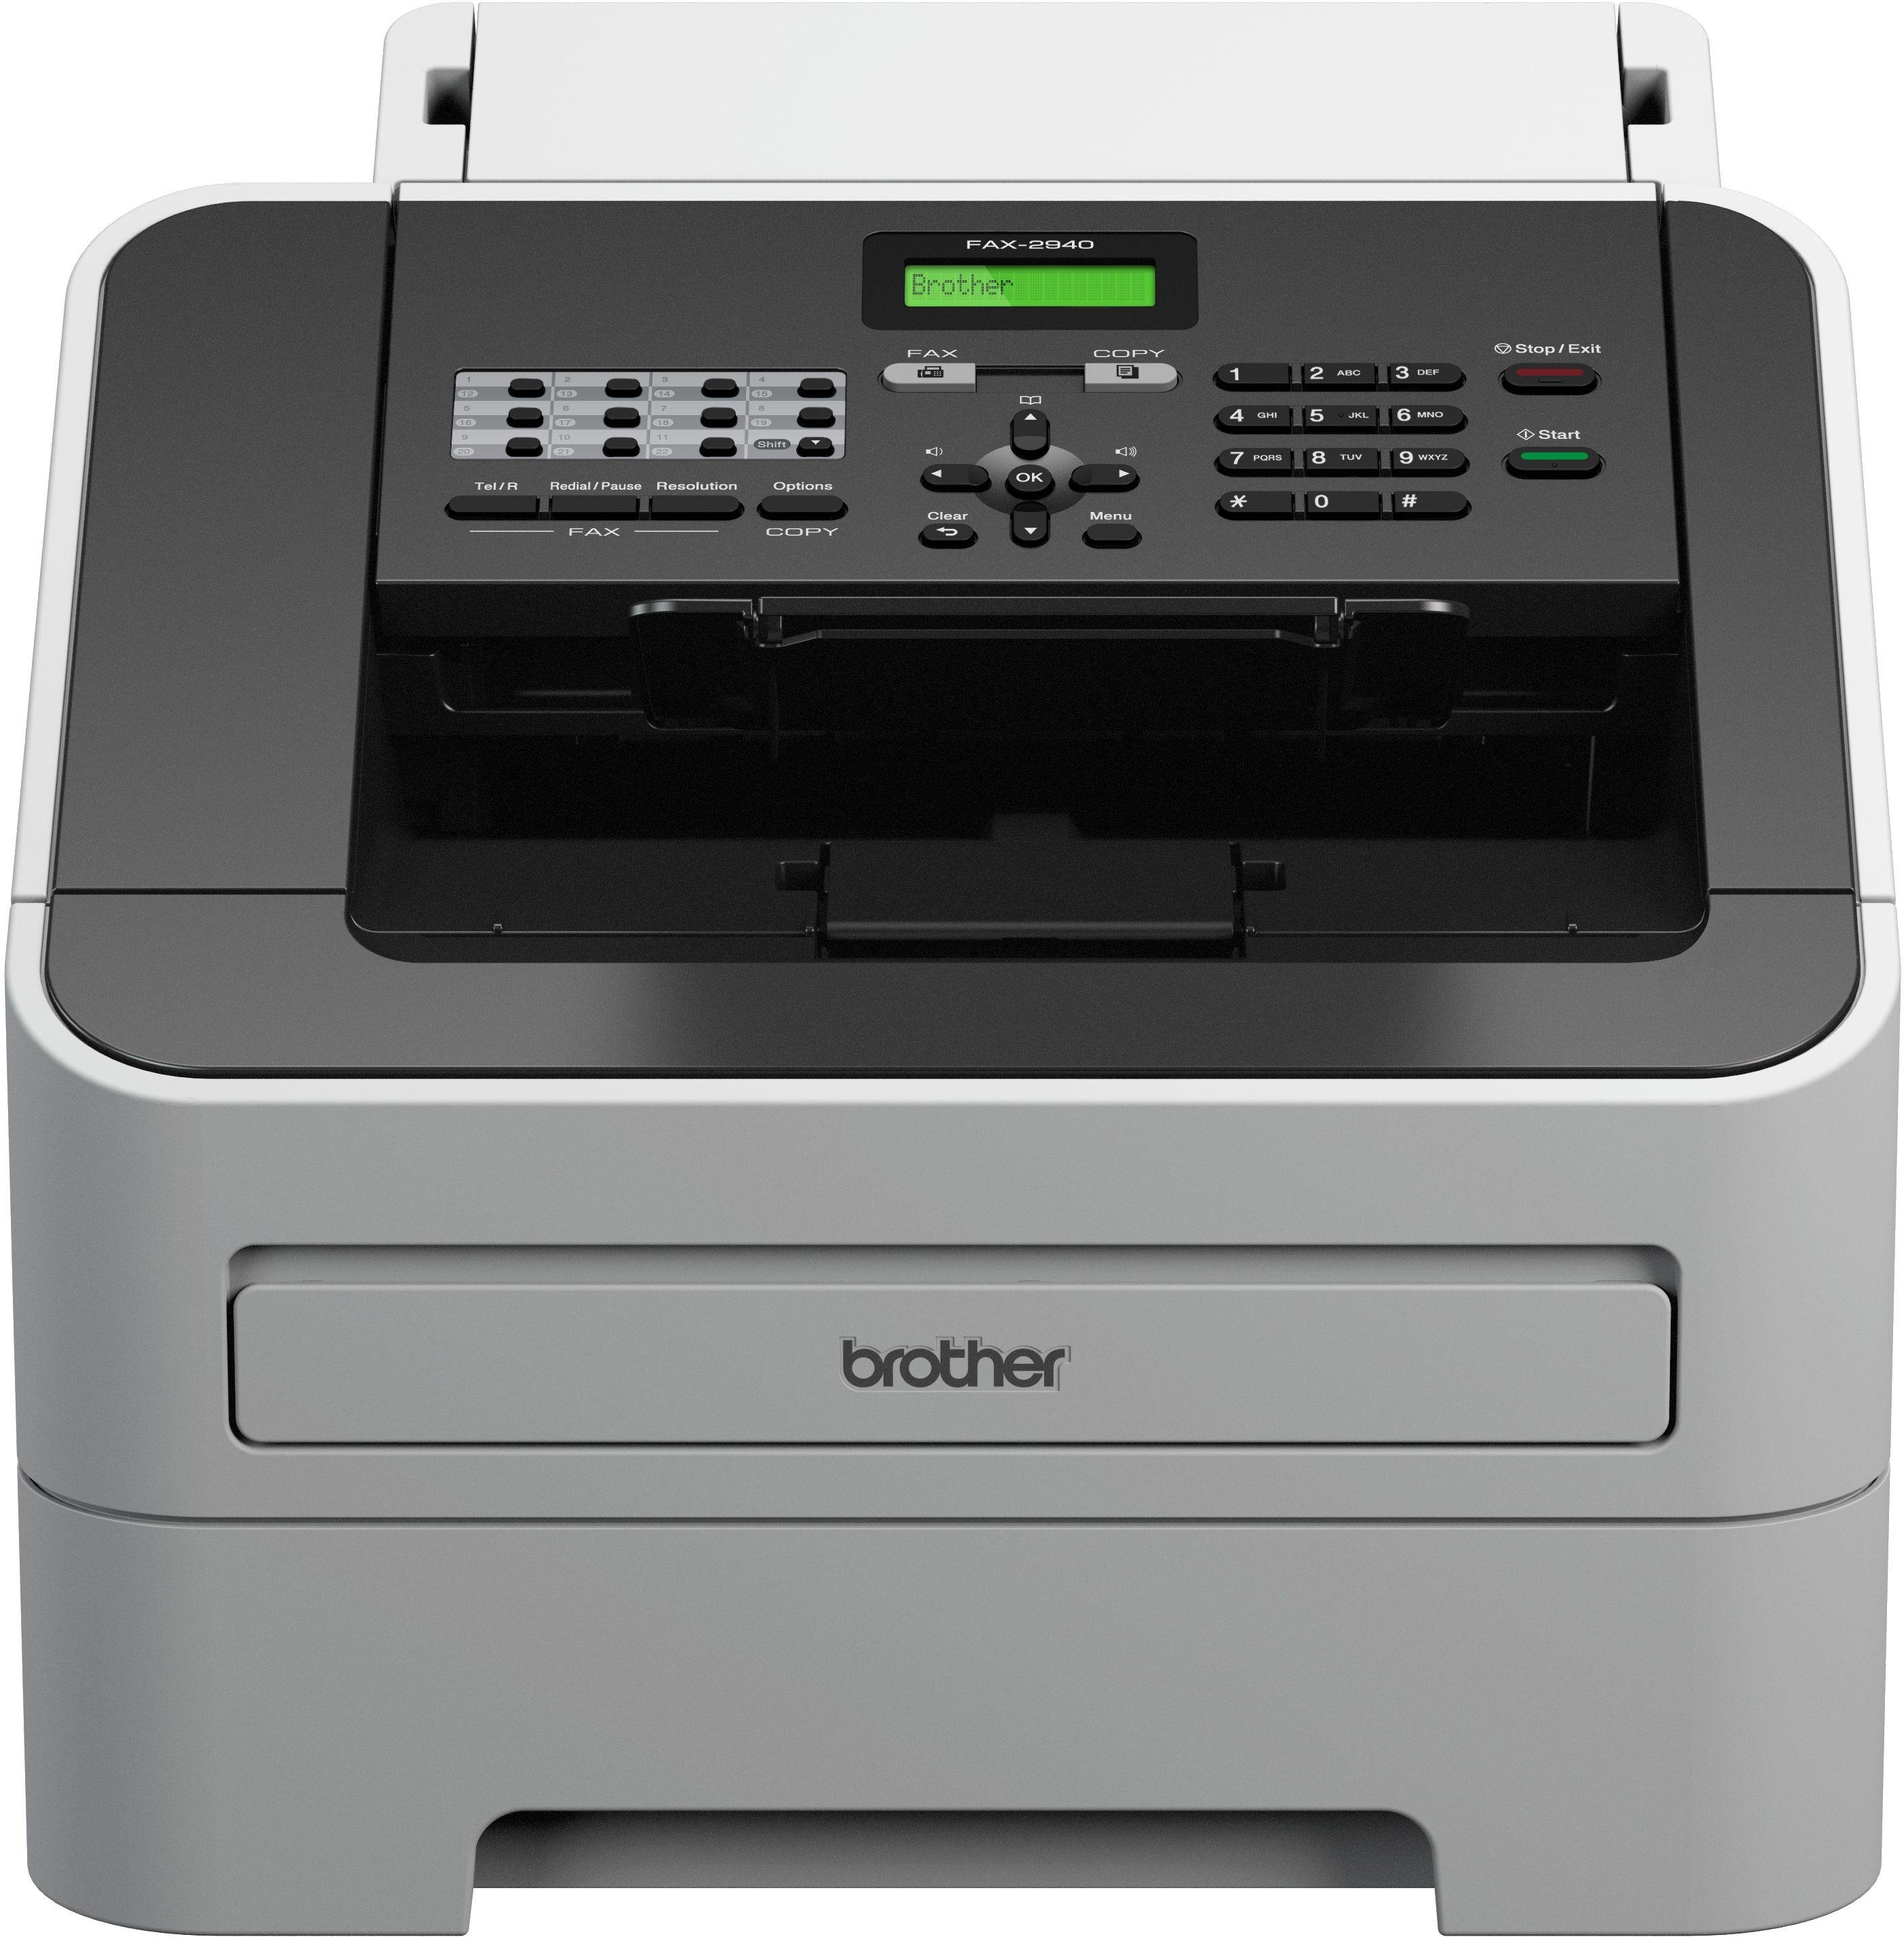 Brother FAX2940 Mono Laser Fax